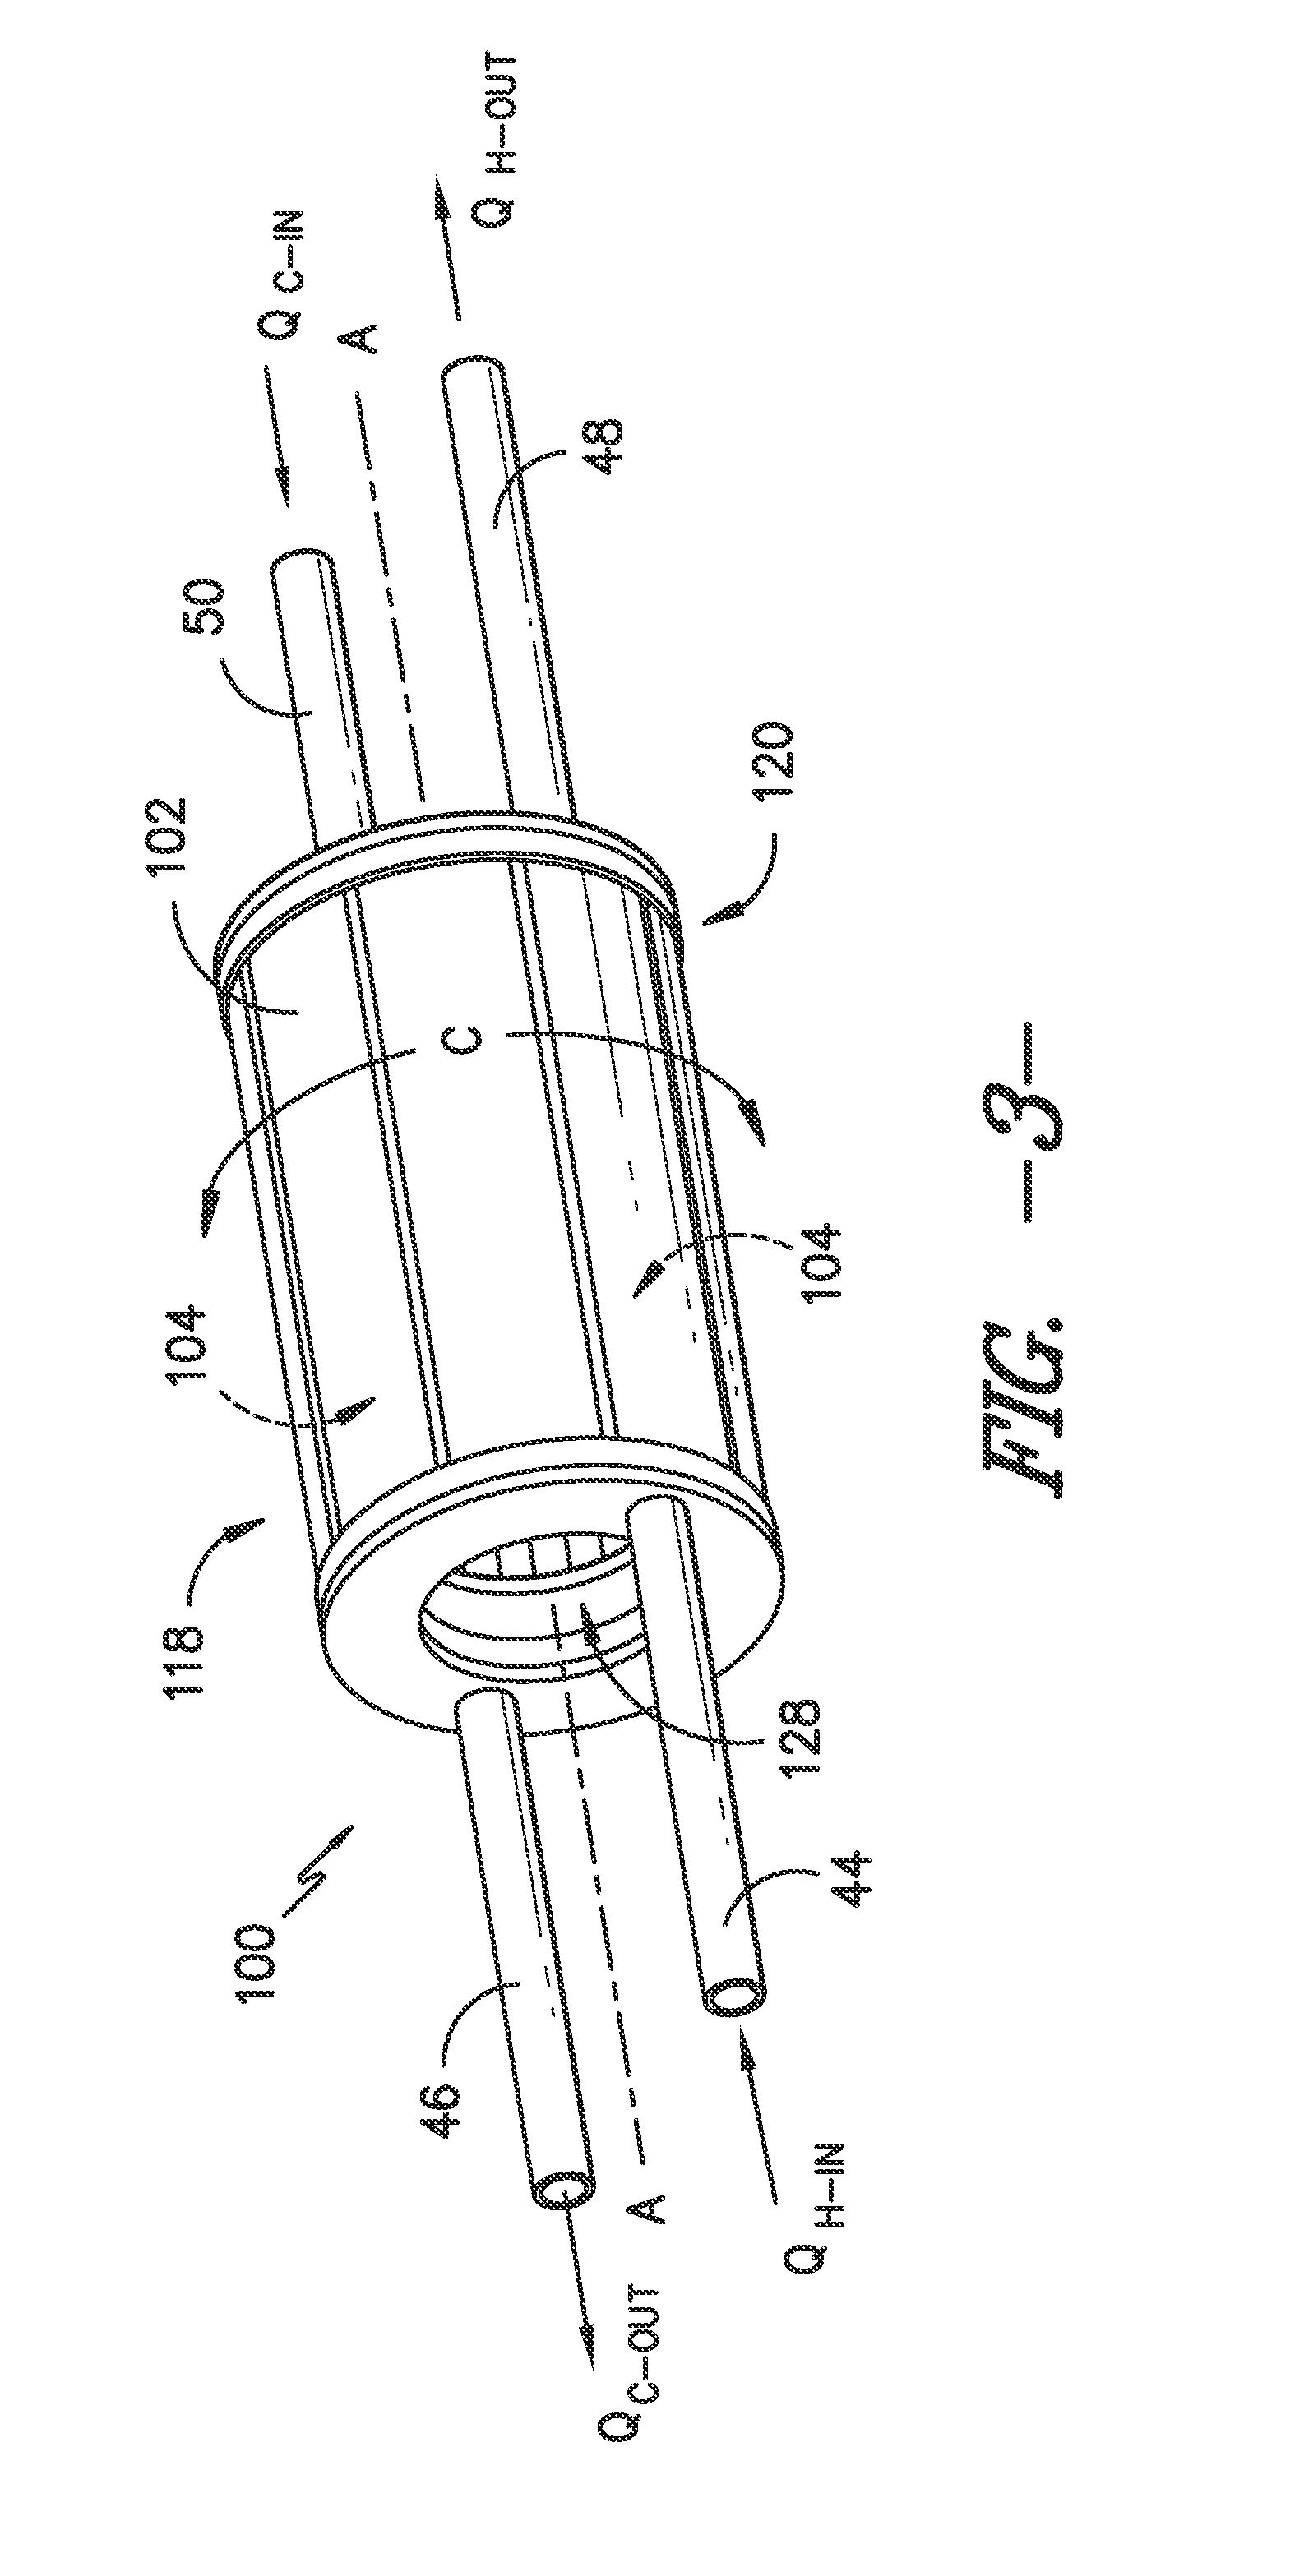 Magneto caloric device with continuous pump